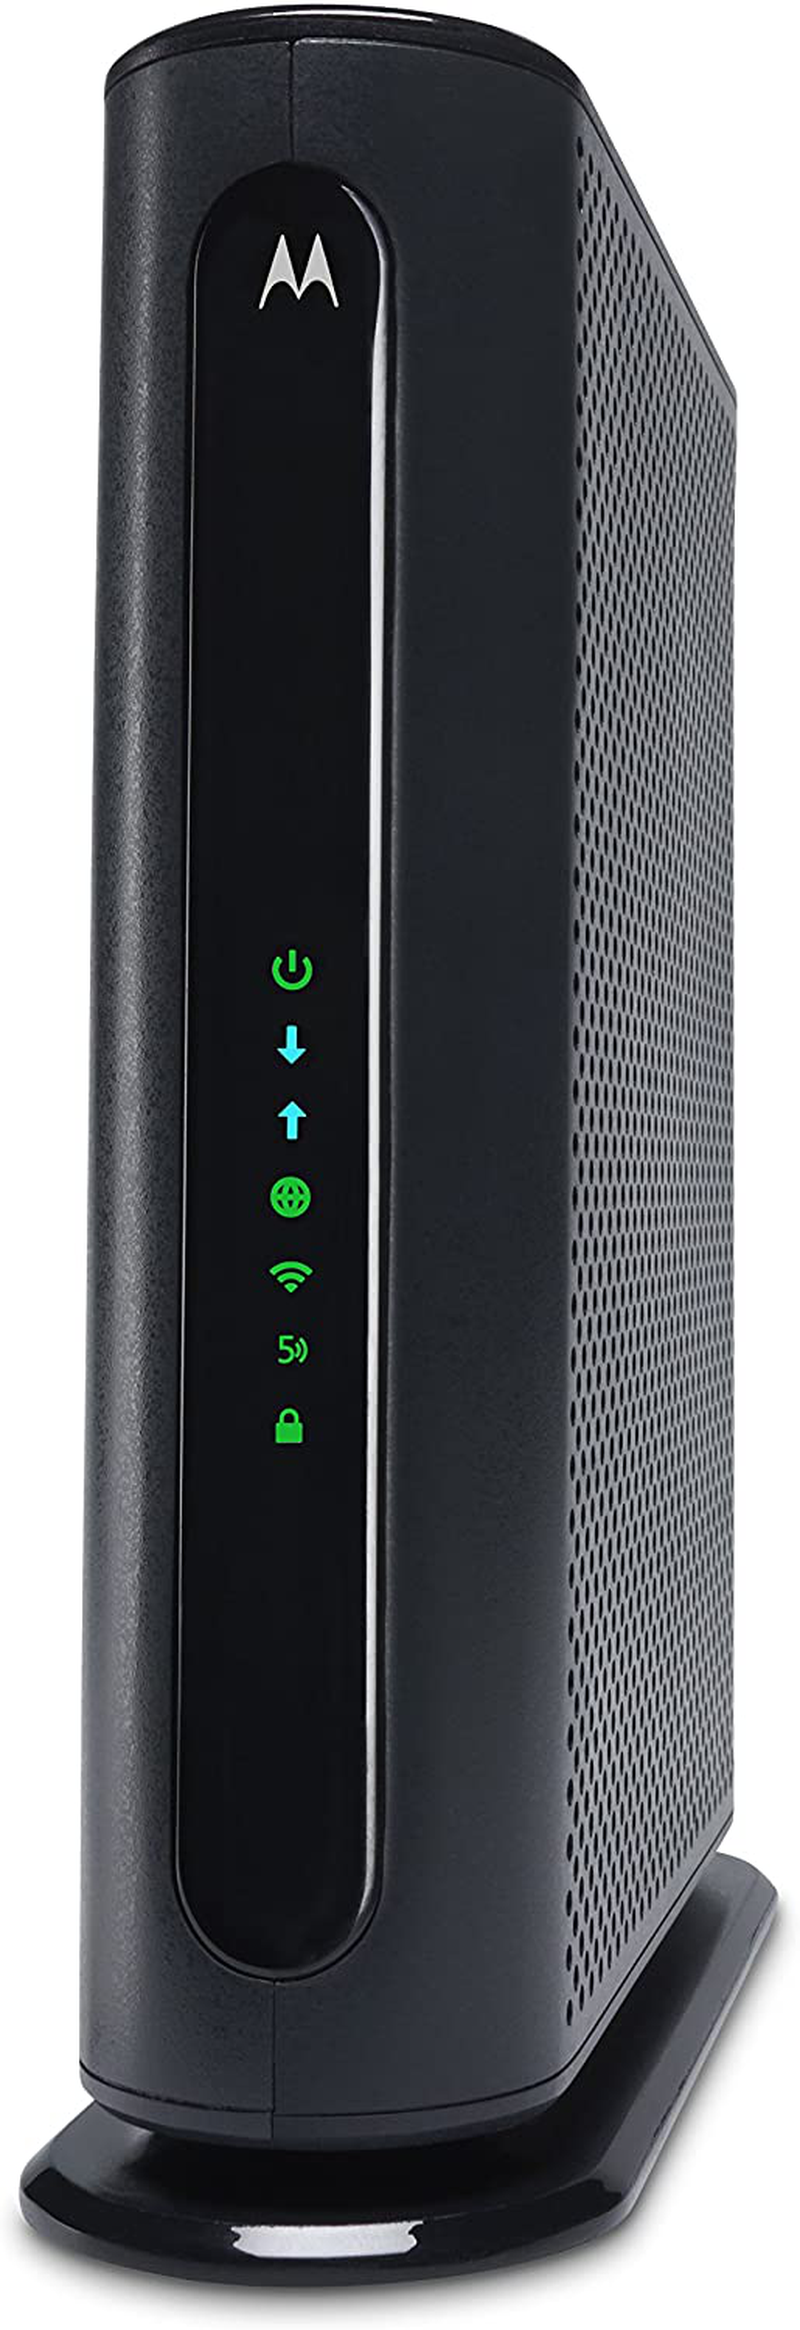 Motorola MG8702 | DOCSIS 3.1 Cable Modem + Wi-Fi Router (High Speed Combo) with Intelligent Power Boost | AC3200 Wi-Fi Speed | Approved for Comcast Xfinity, Cox, and Charter Spectrum Electronics > Networking > Modems Motorola AC-1600 Speed (Wi-Fi 4) DOCSIS 3.0  